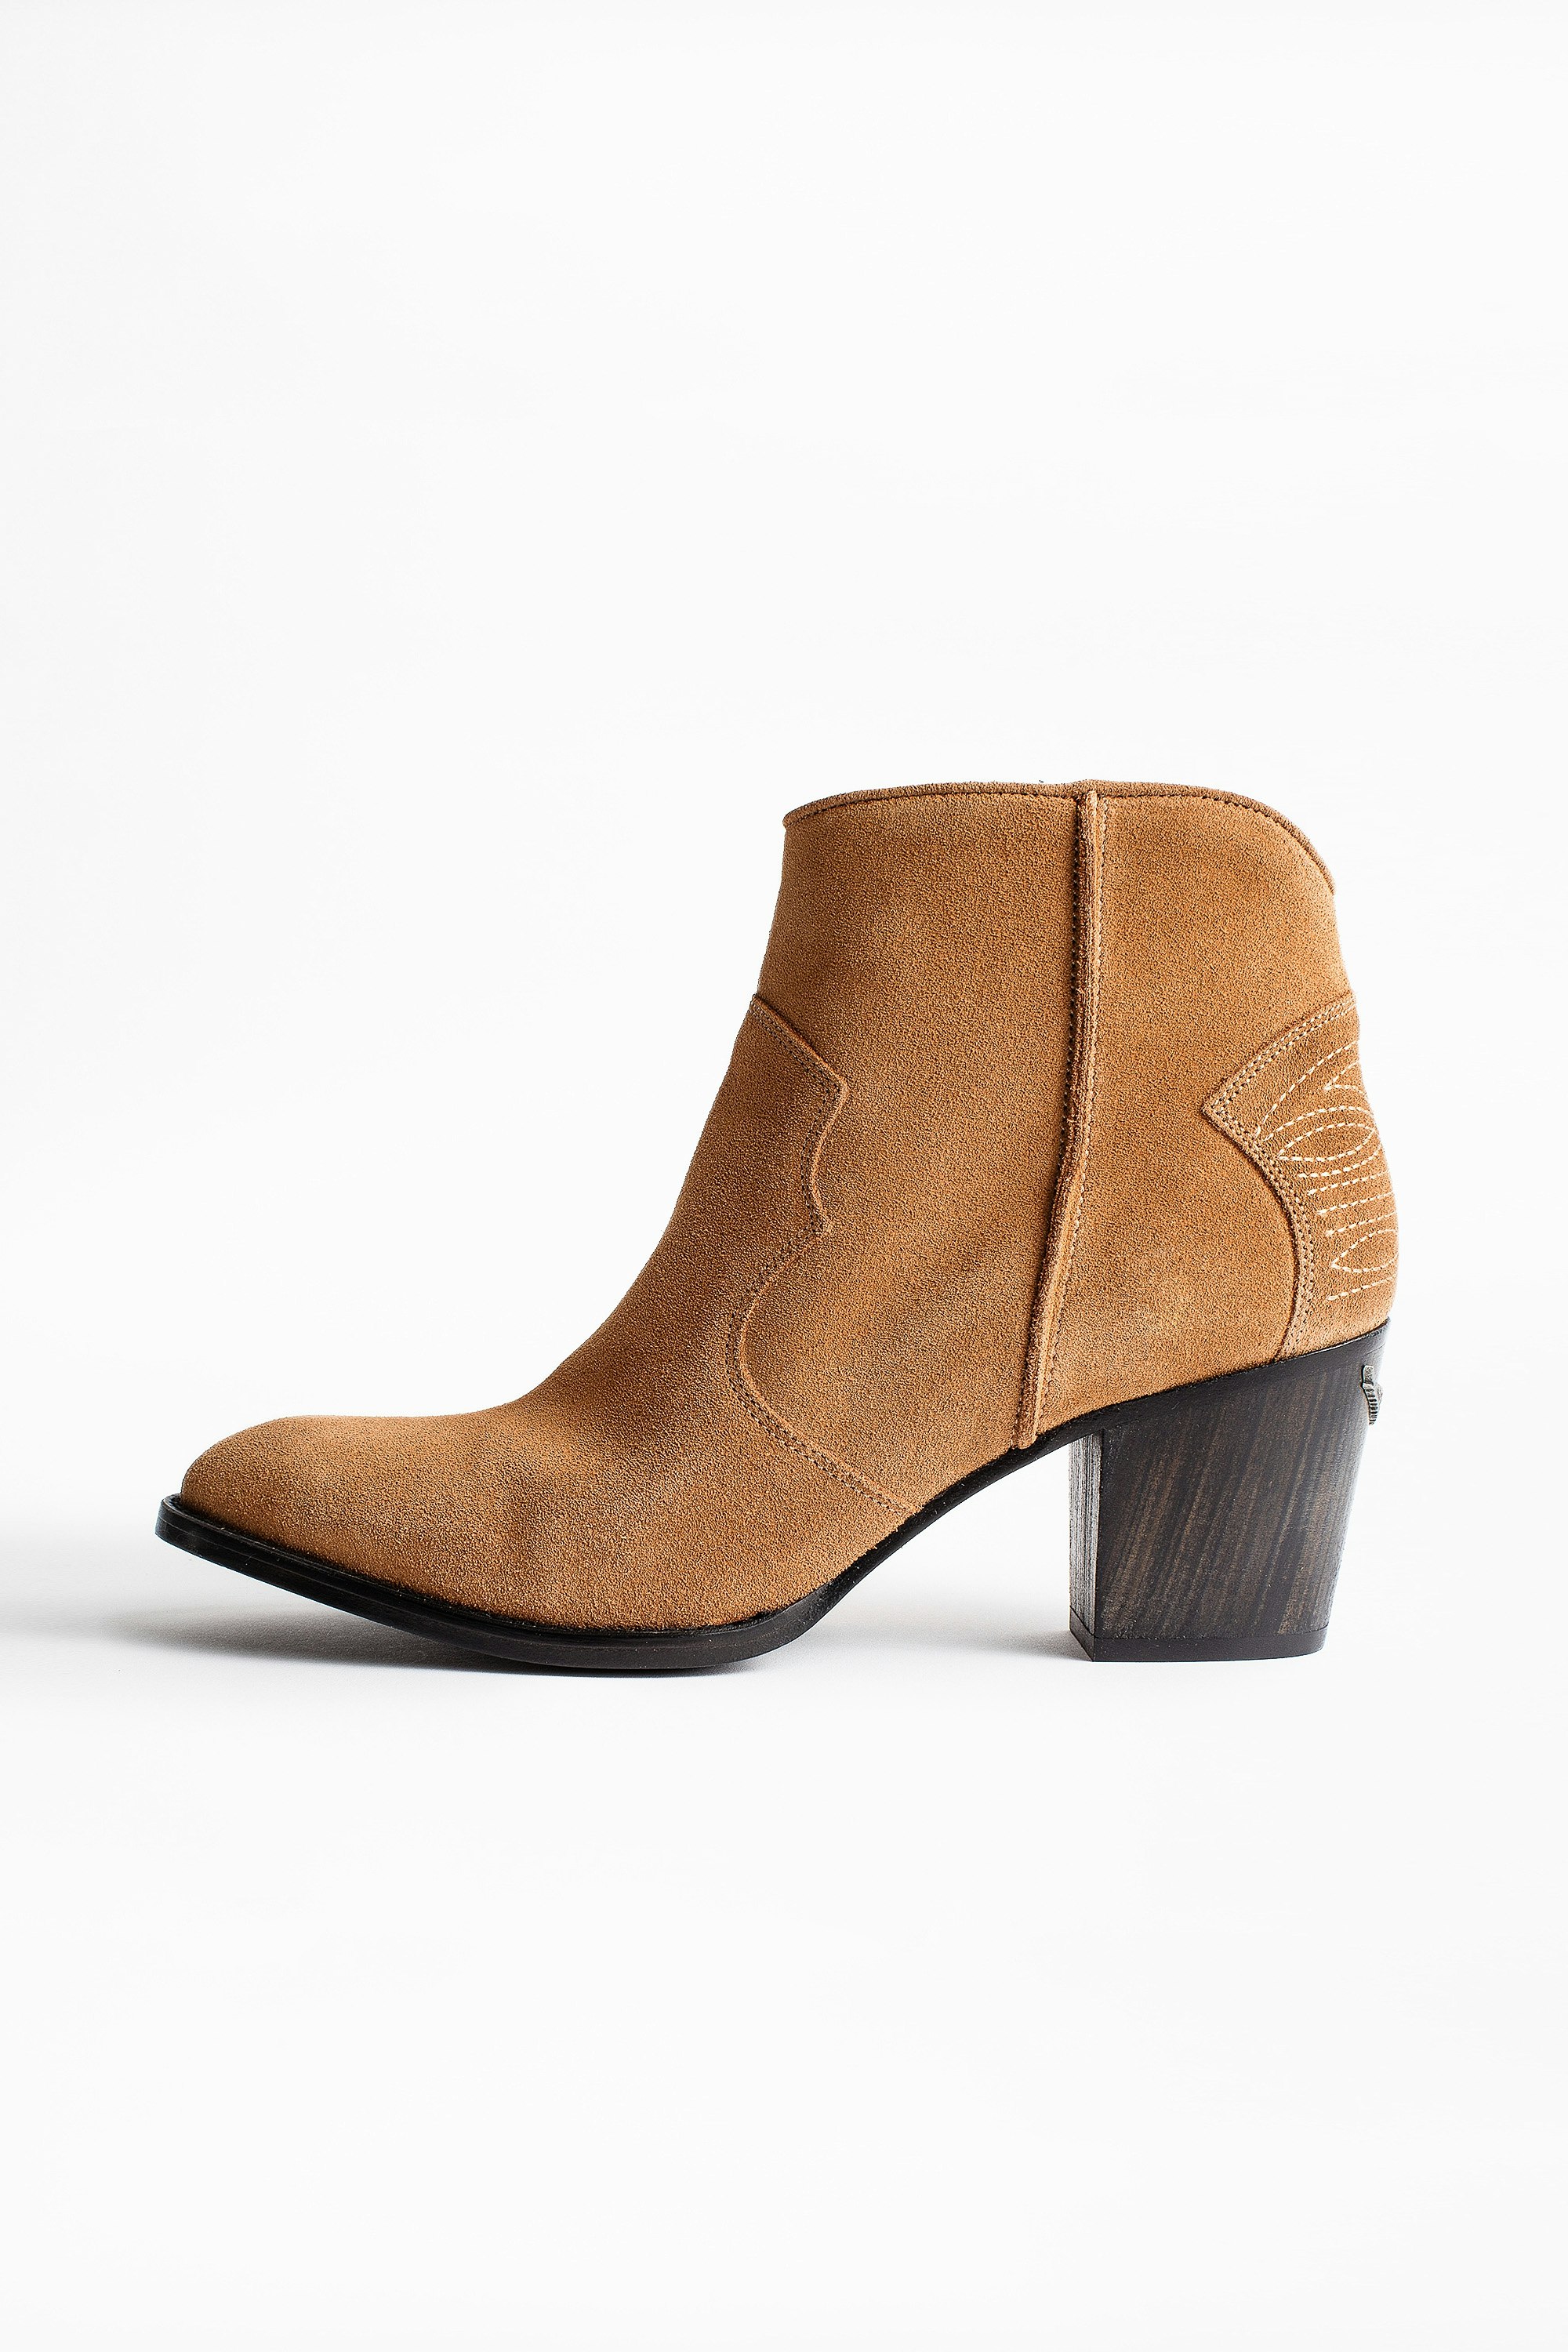 Molly Suede Ankle Boots - boots women 